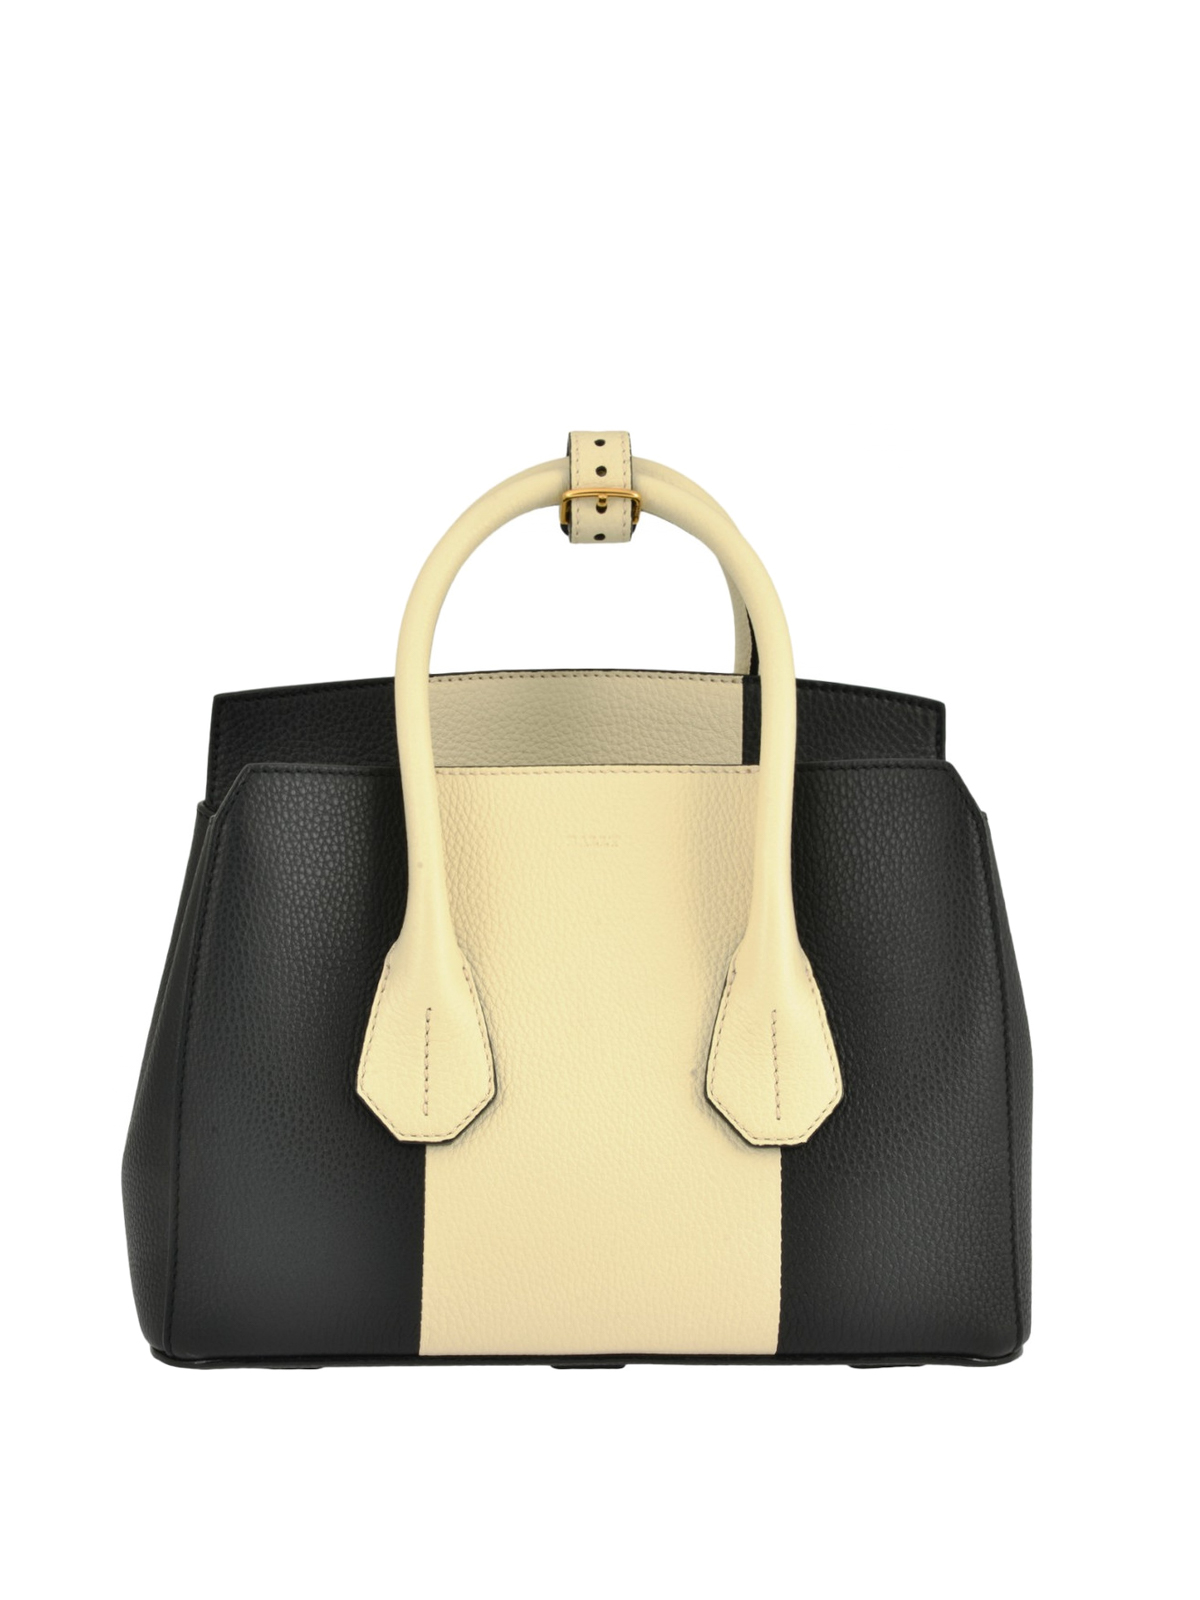 Totes bags Bally - Sommet small leather tote